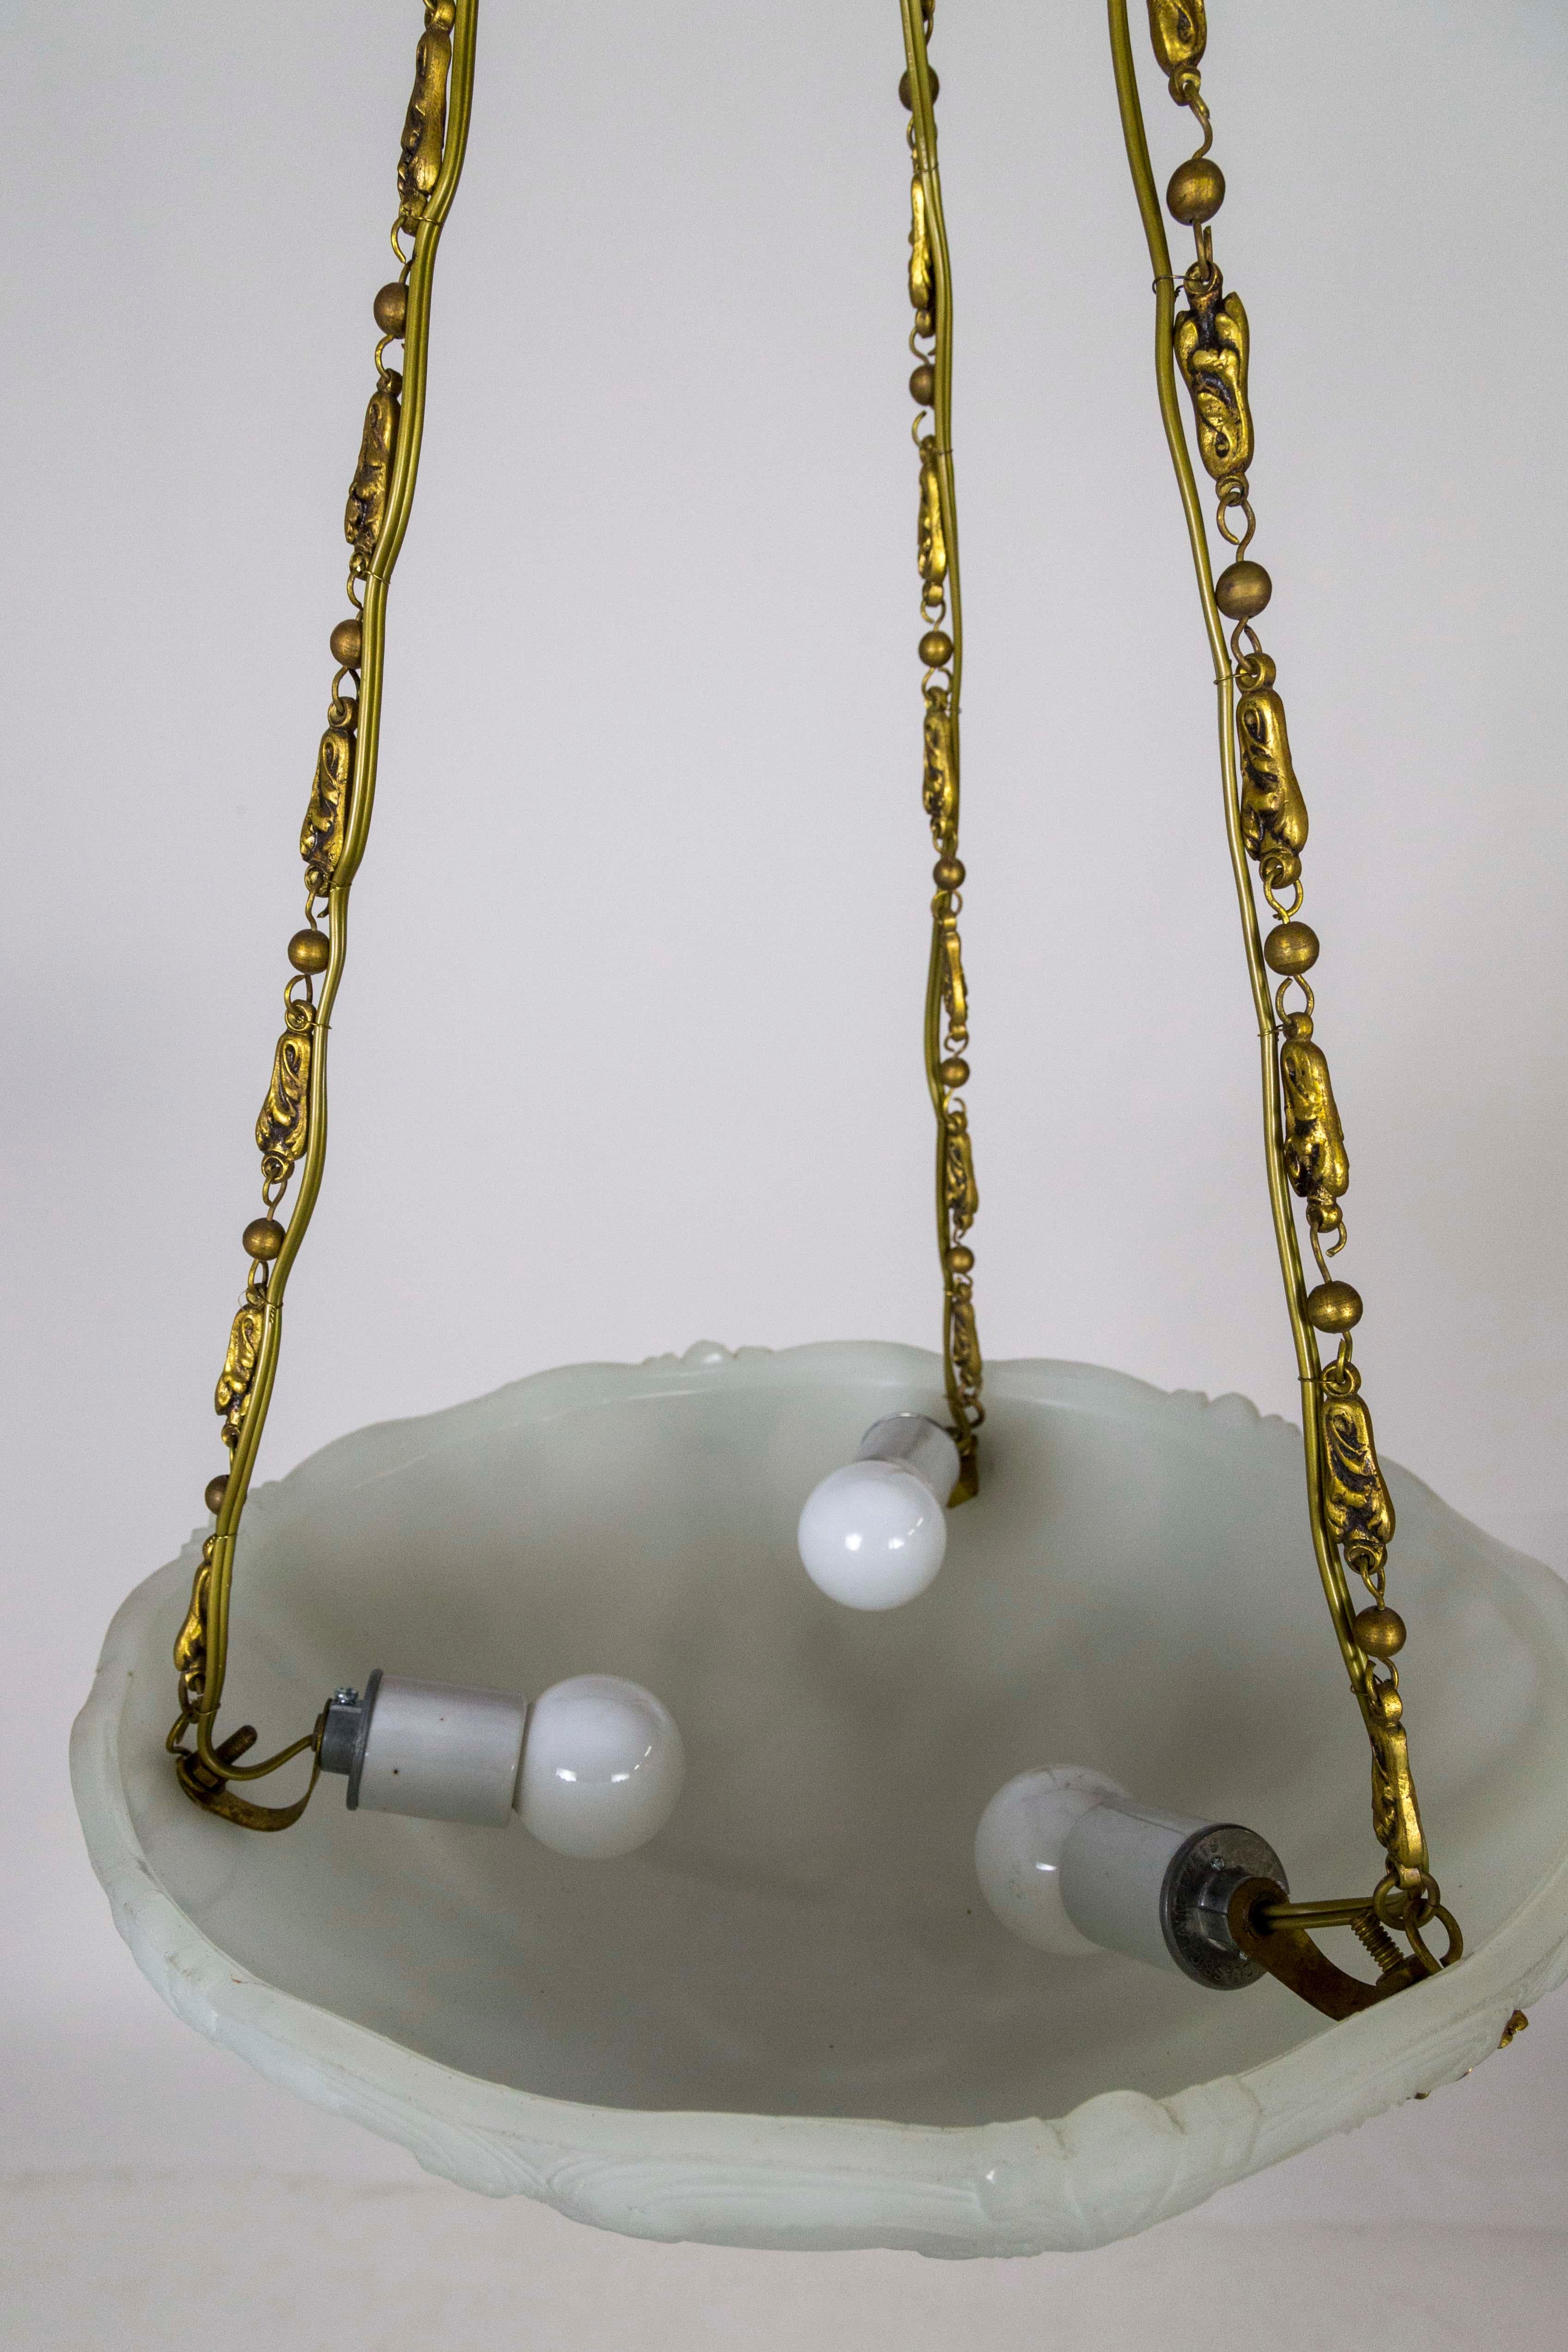 Early 1900s Neoclassical Detailed Milk Glass Bowl Pendant Light W/ Unique Chain For Sale 4